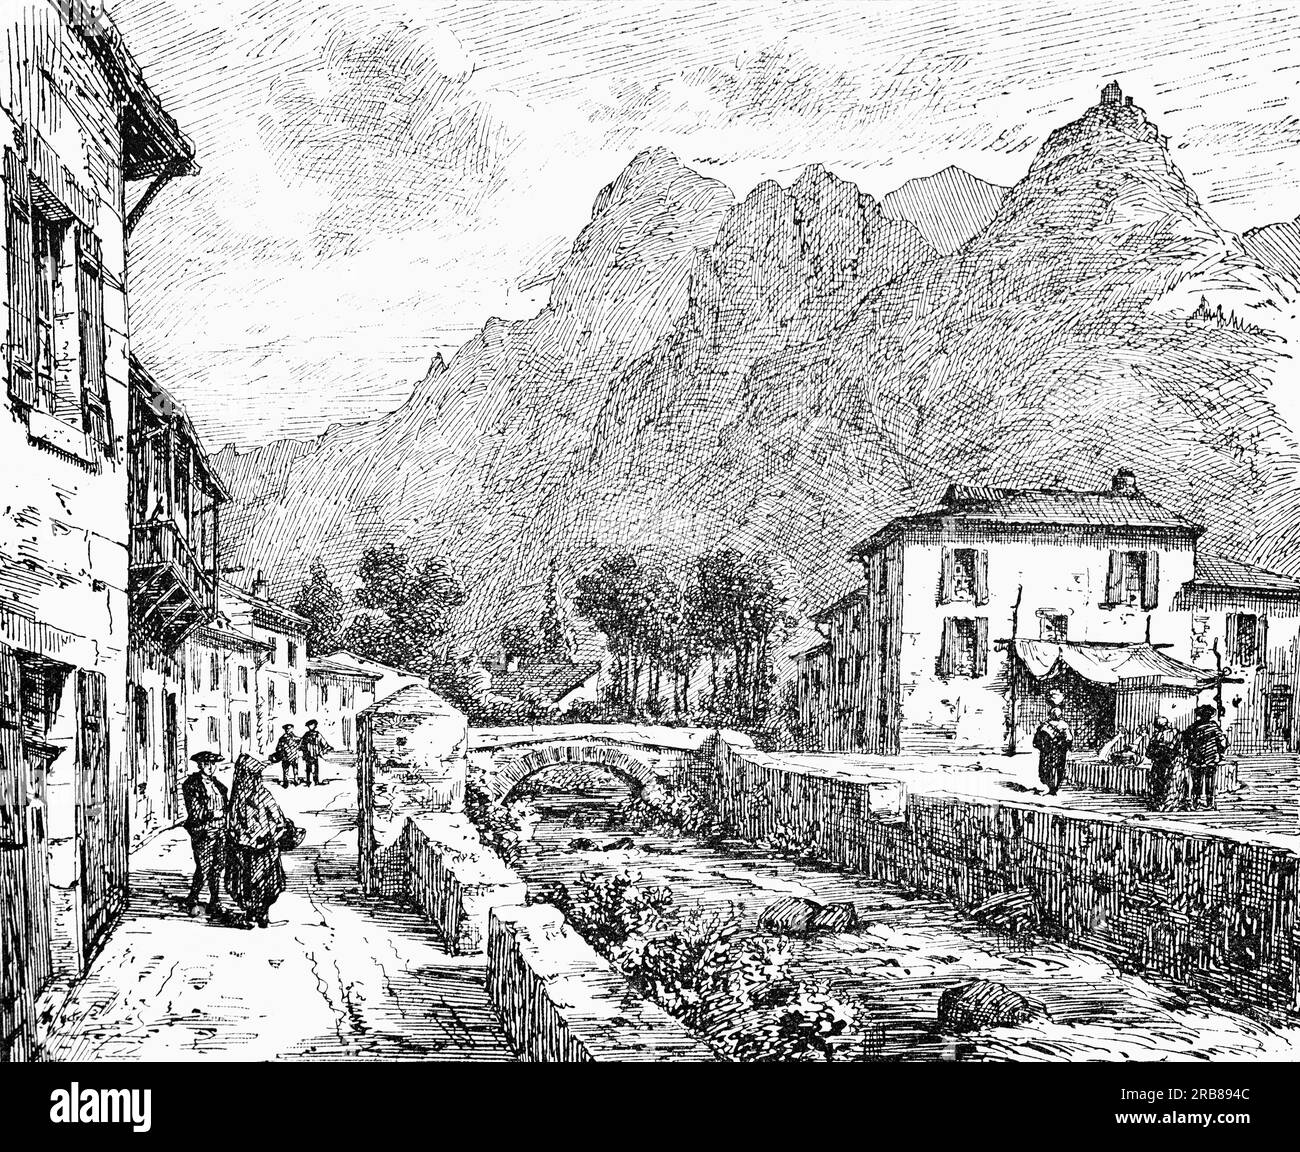 A late 19th century illustration of Auzat, a commune in the Ariège department in the Occitanie region of south-western France, lying on the border between France and Spain. Stock Photo